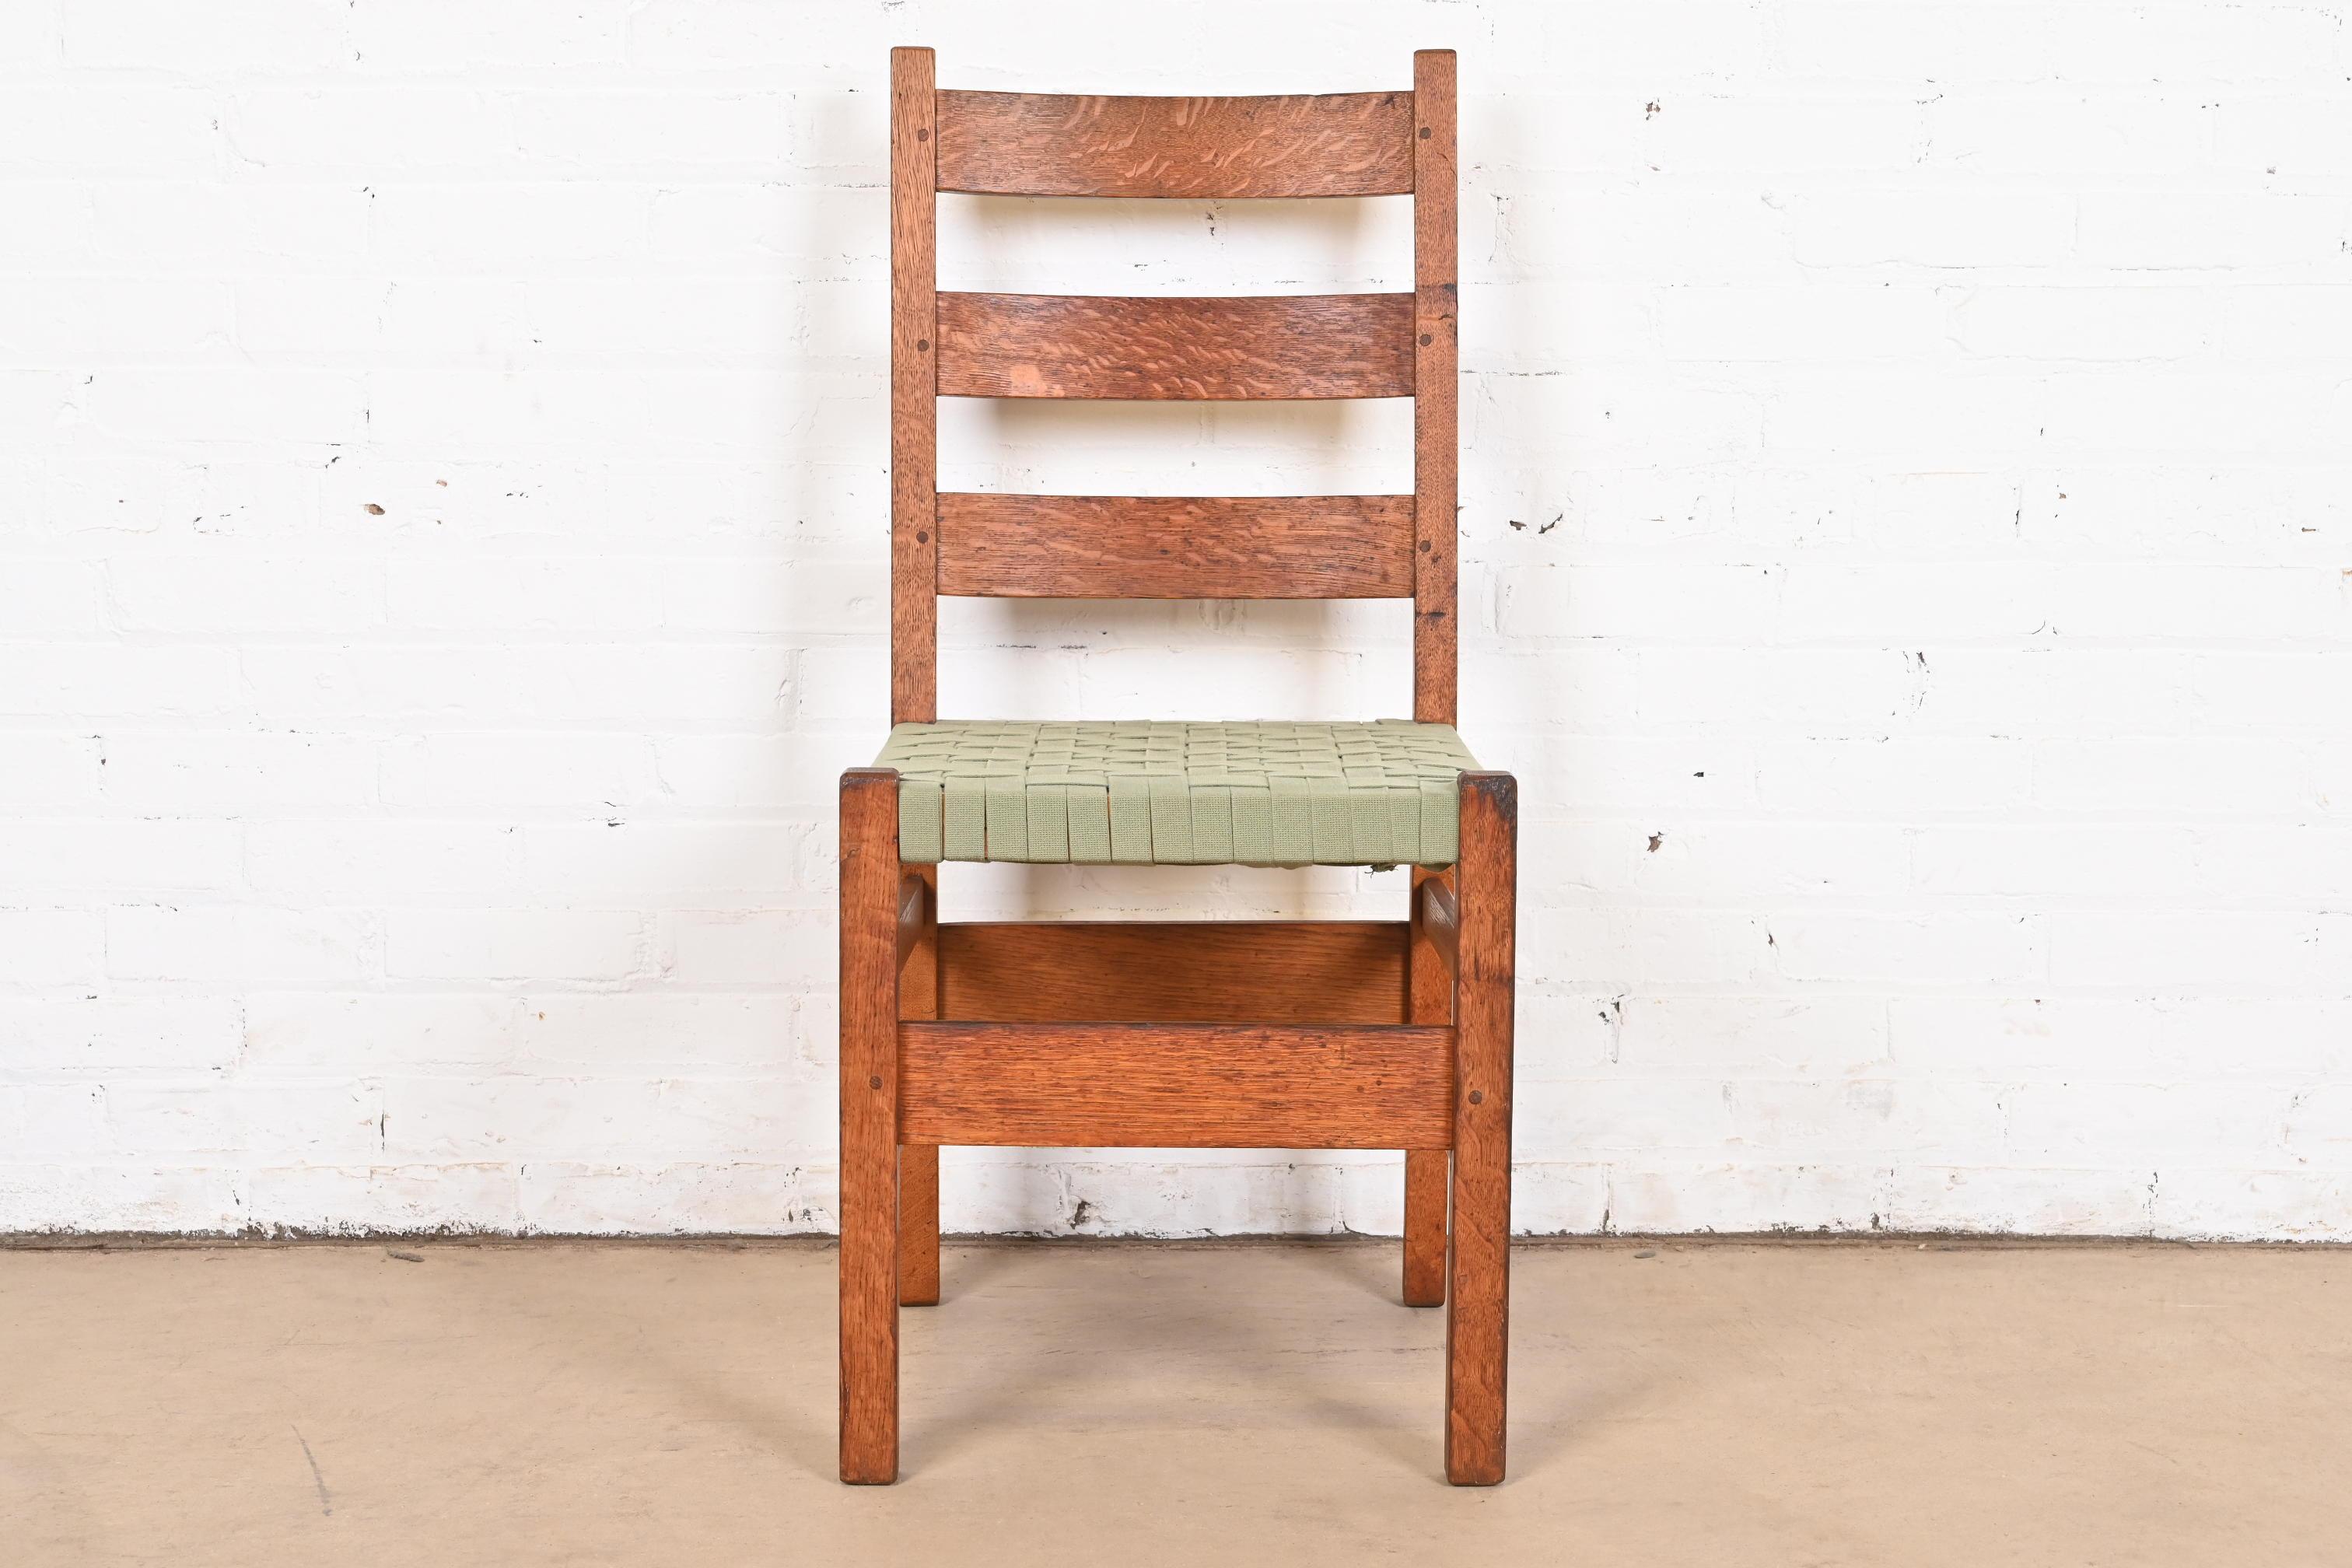 A rare and exceptional antique Mission or Arts & Crafts ladder back desk chair or side chair

By Gustav Stickley

USA, Early 20th Century

Solid quarter sawn oak, with woven upholstered seat.

Measures: 17